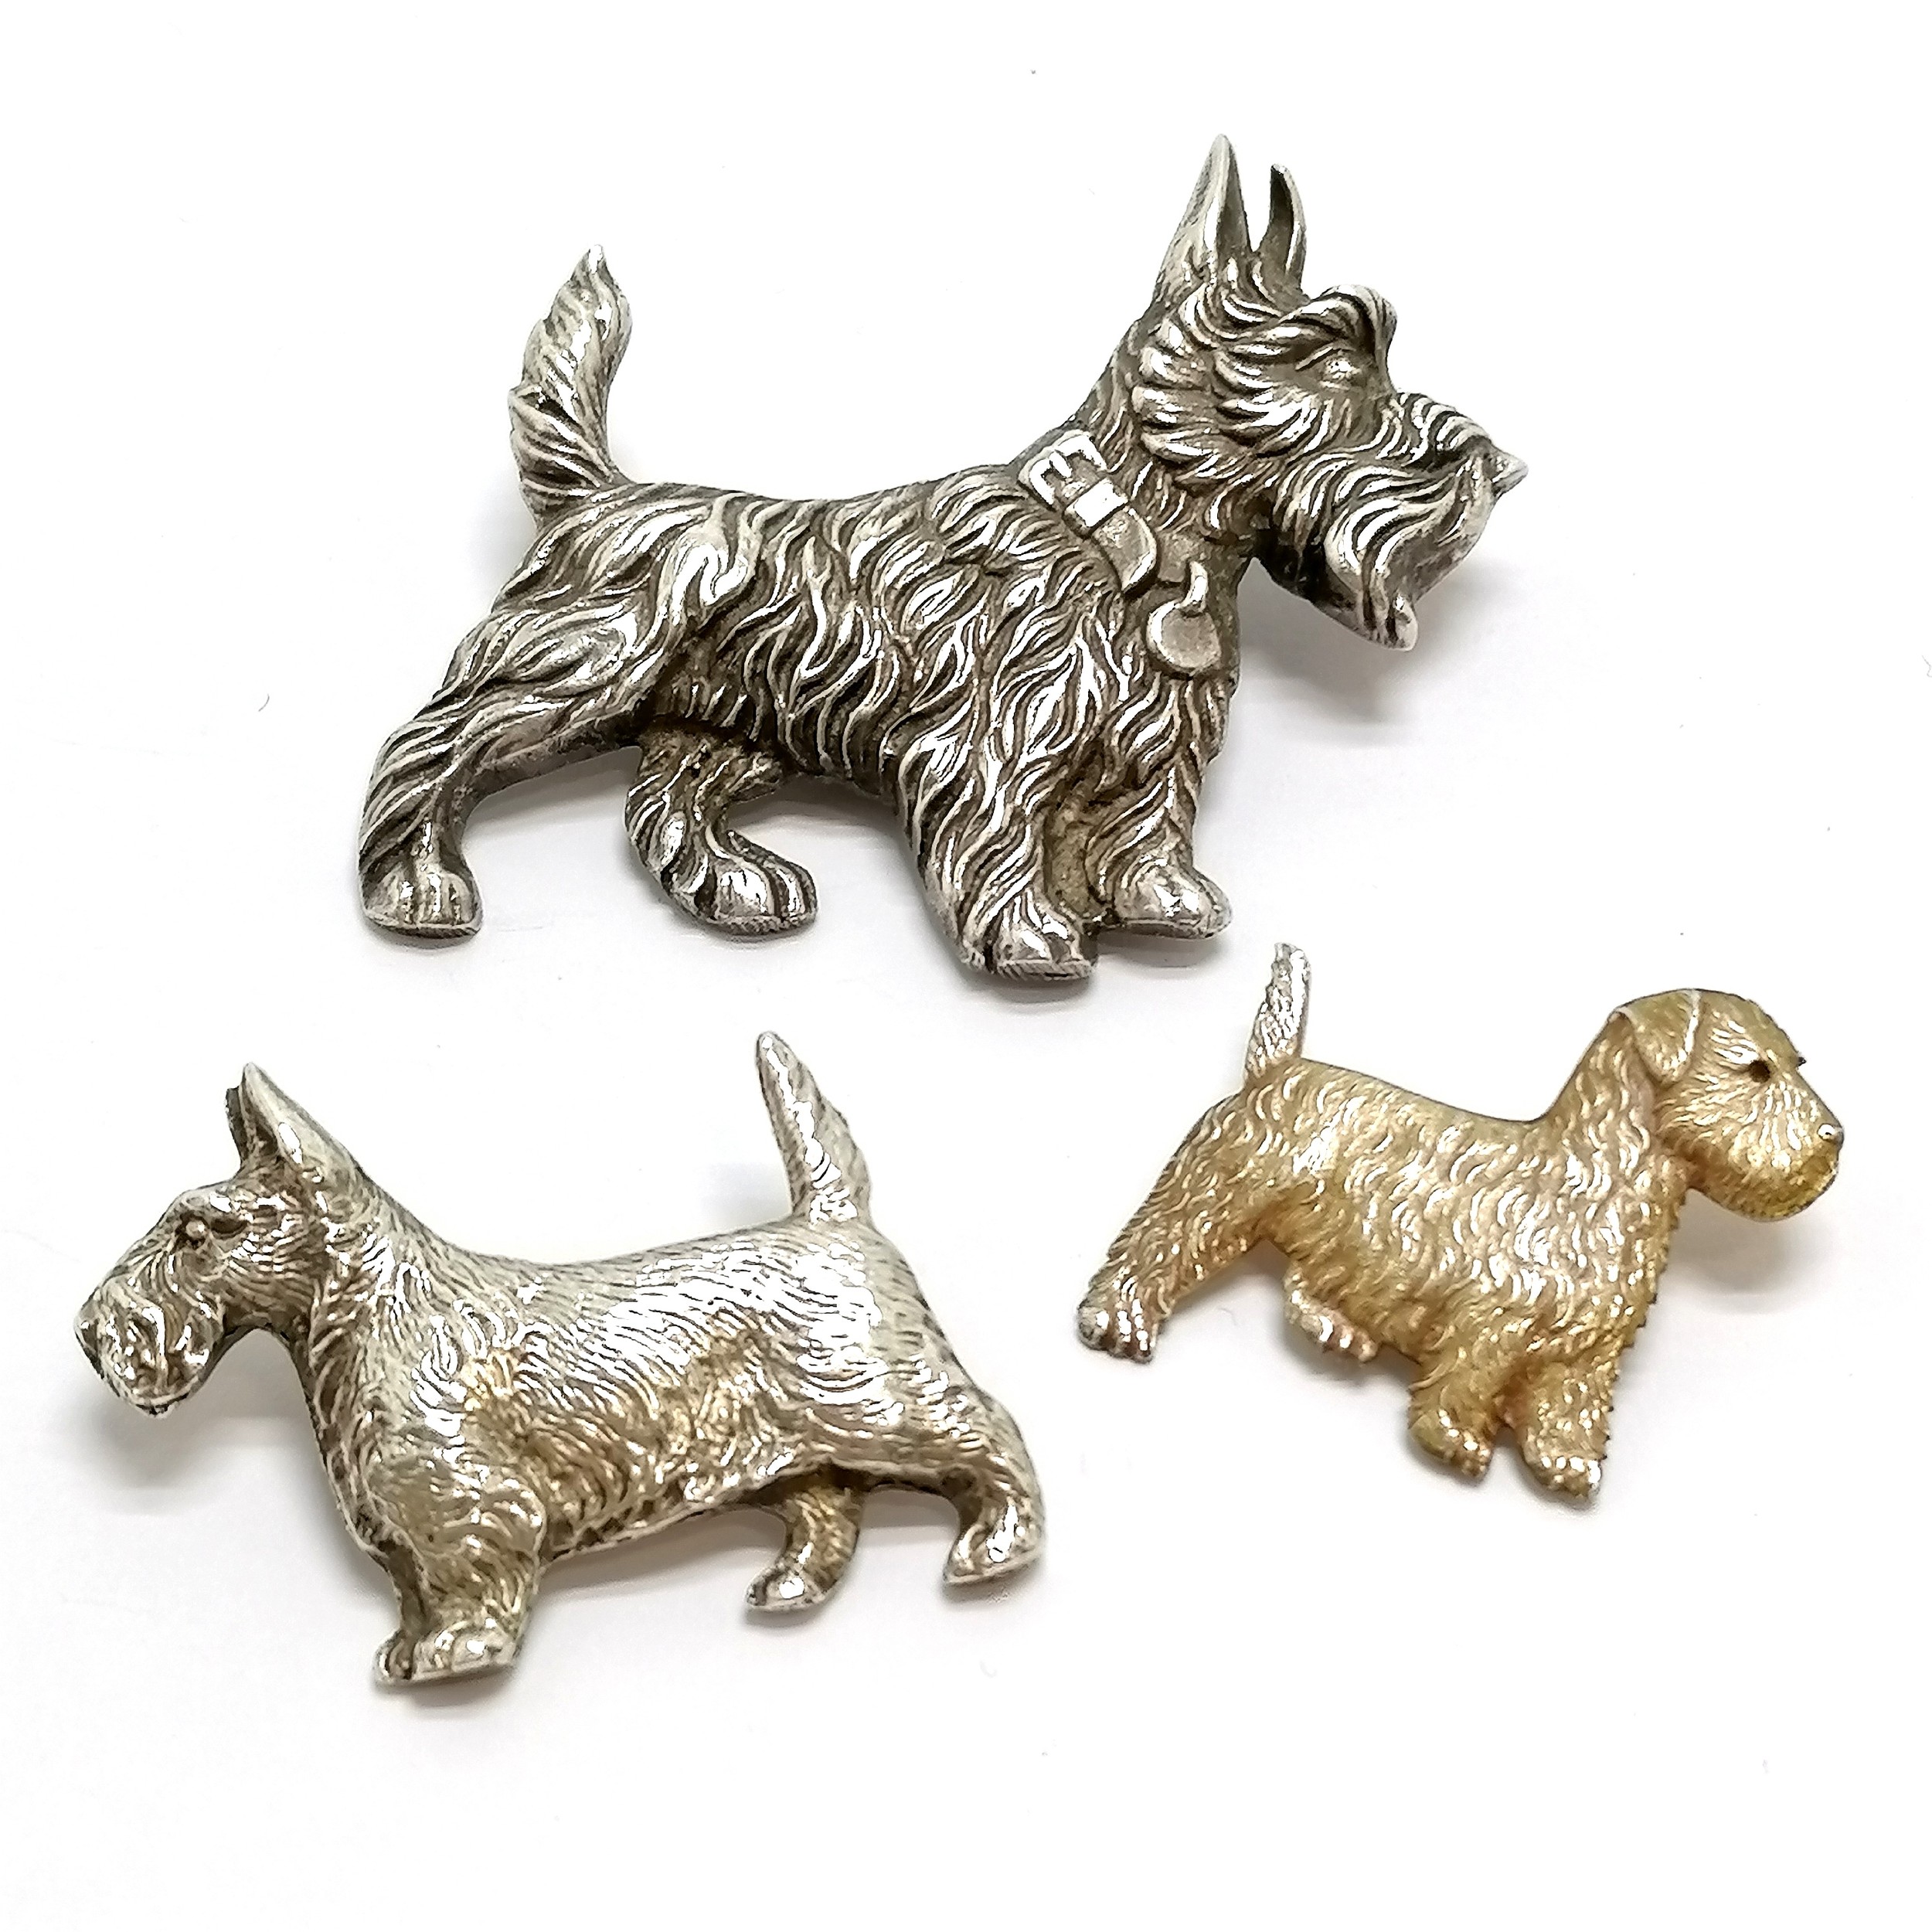 3 x antique silver marked dog brooches - largest 6.5cm across & total weight (3) 46g